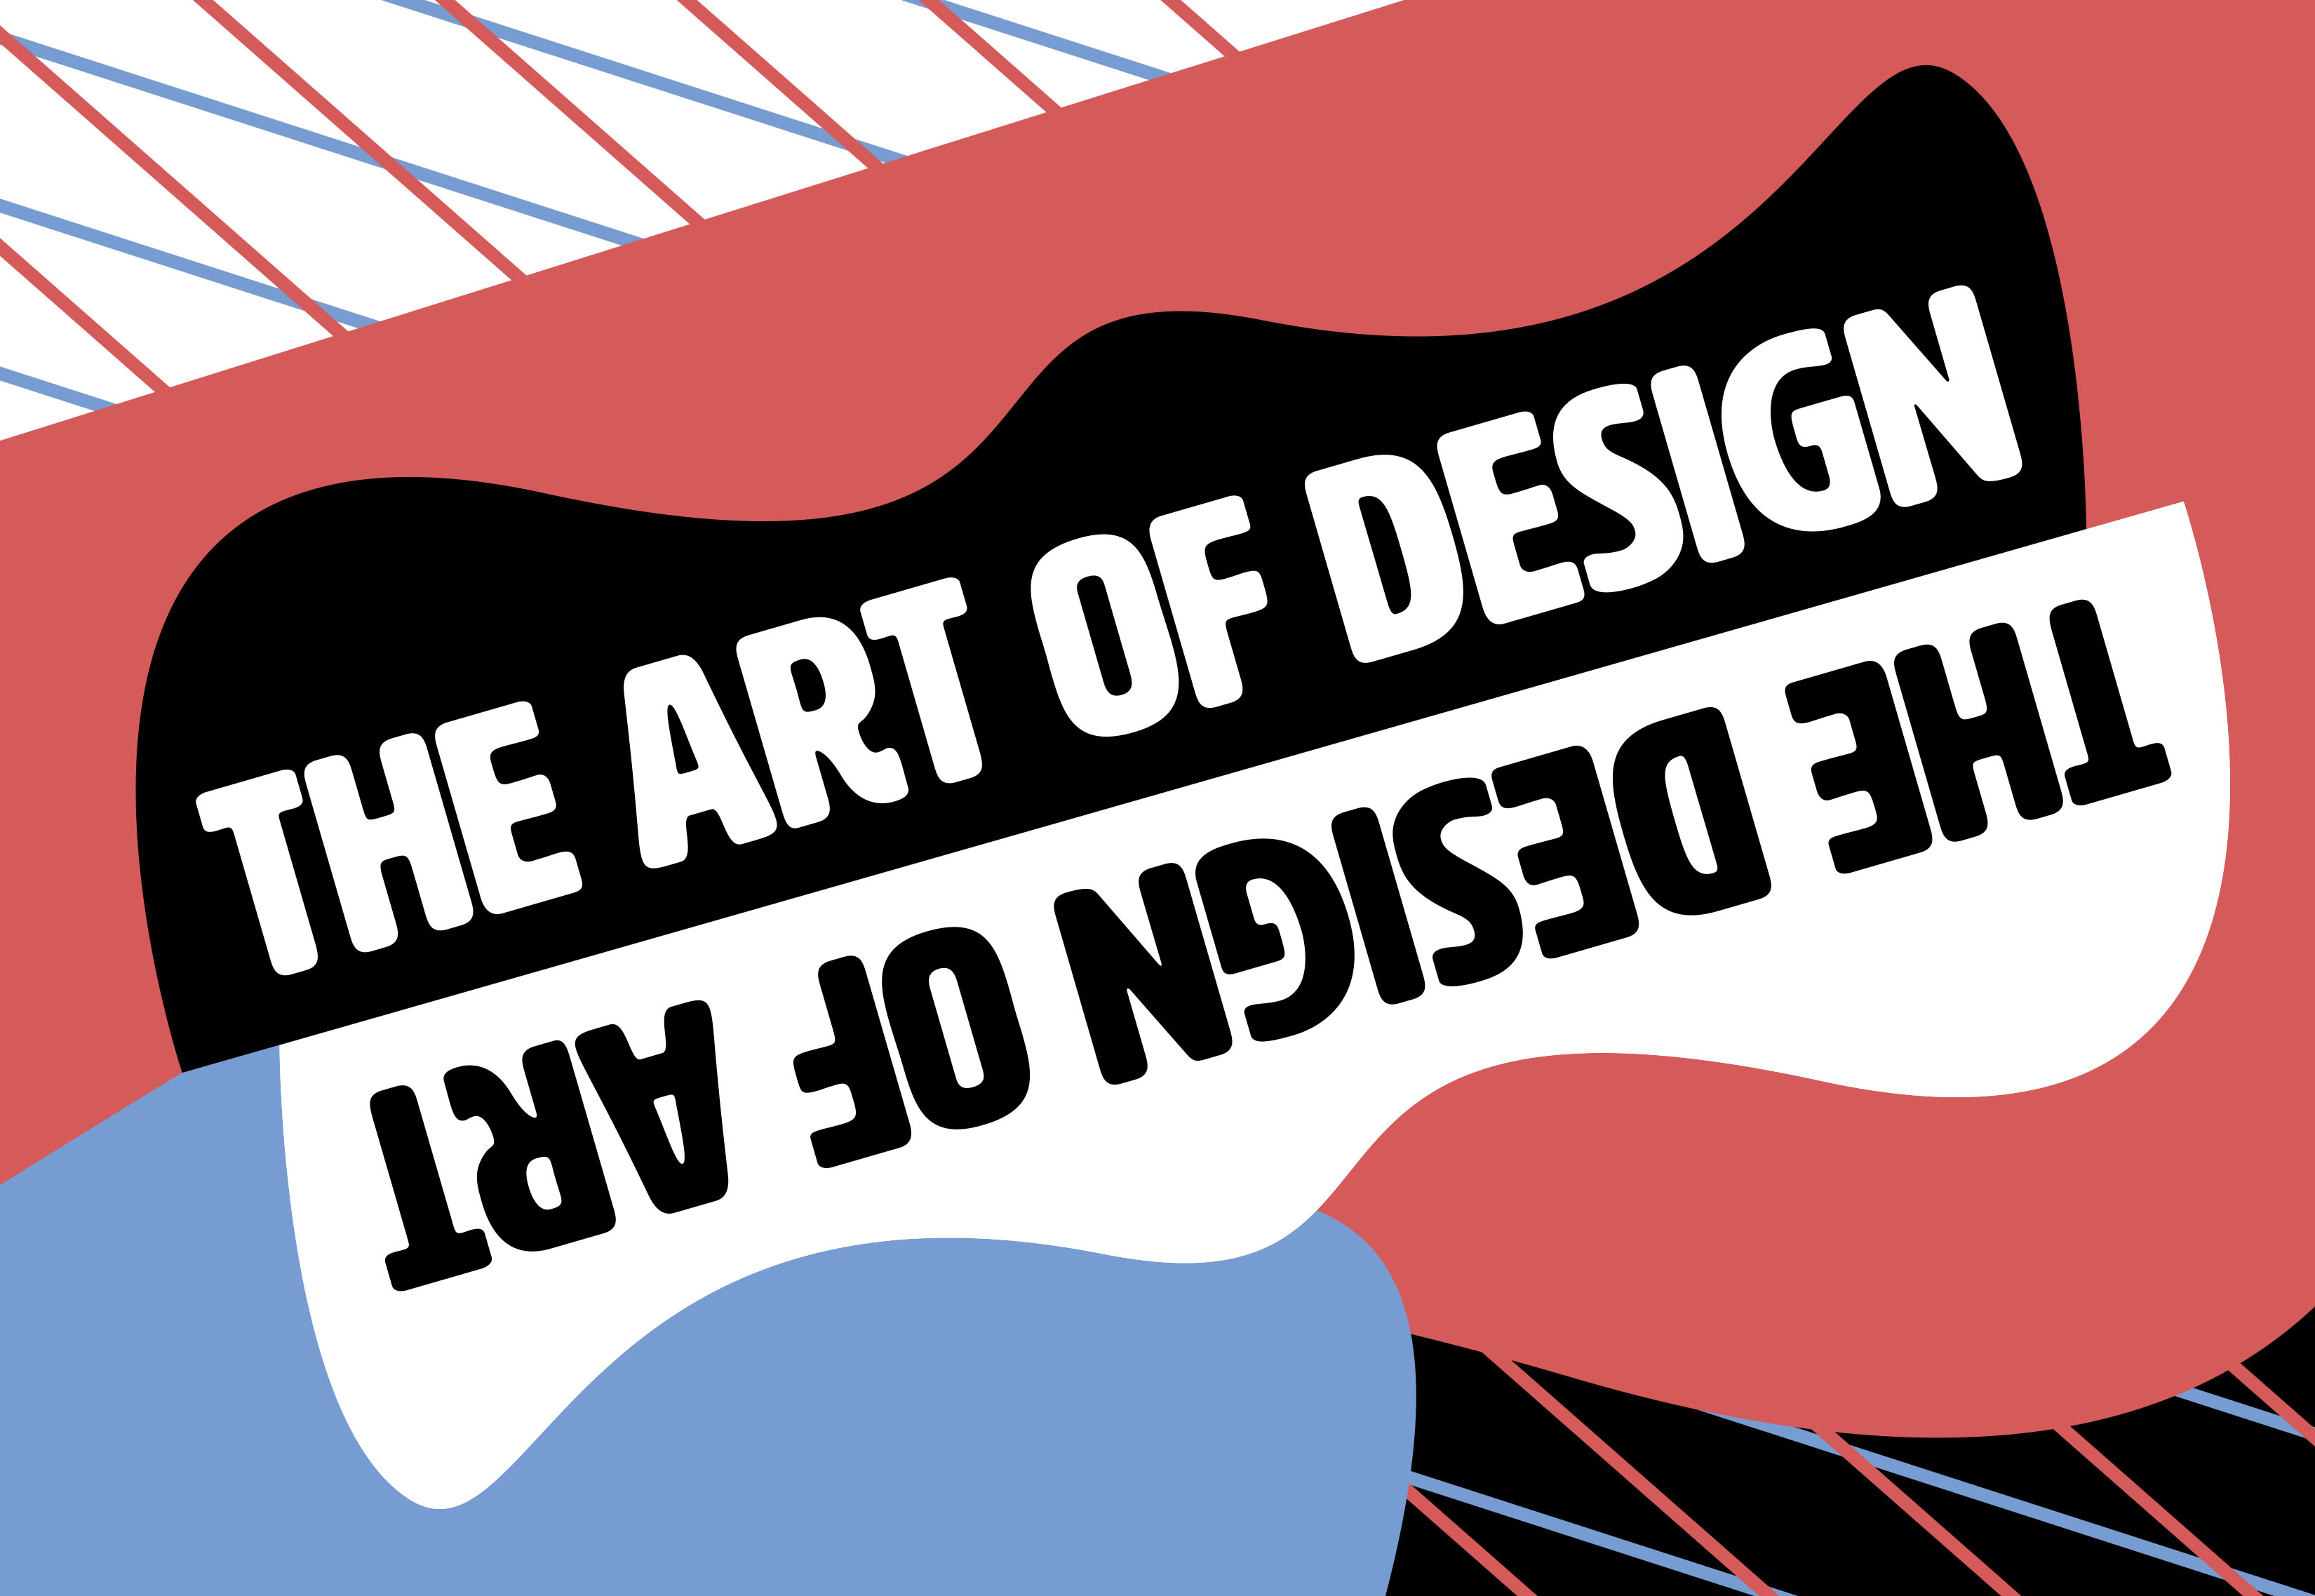 Poster from Art of Design Exhibition